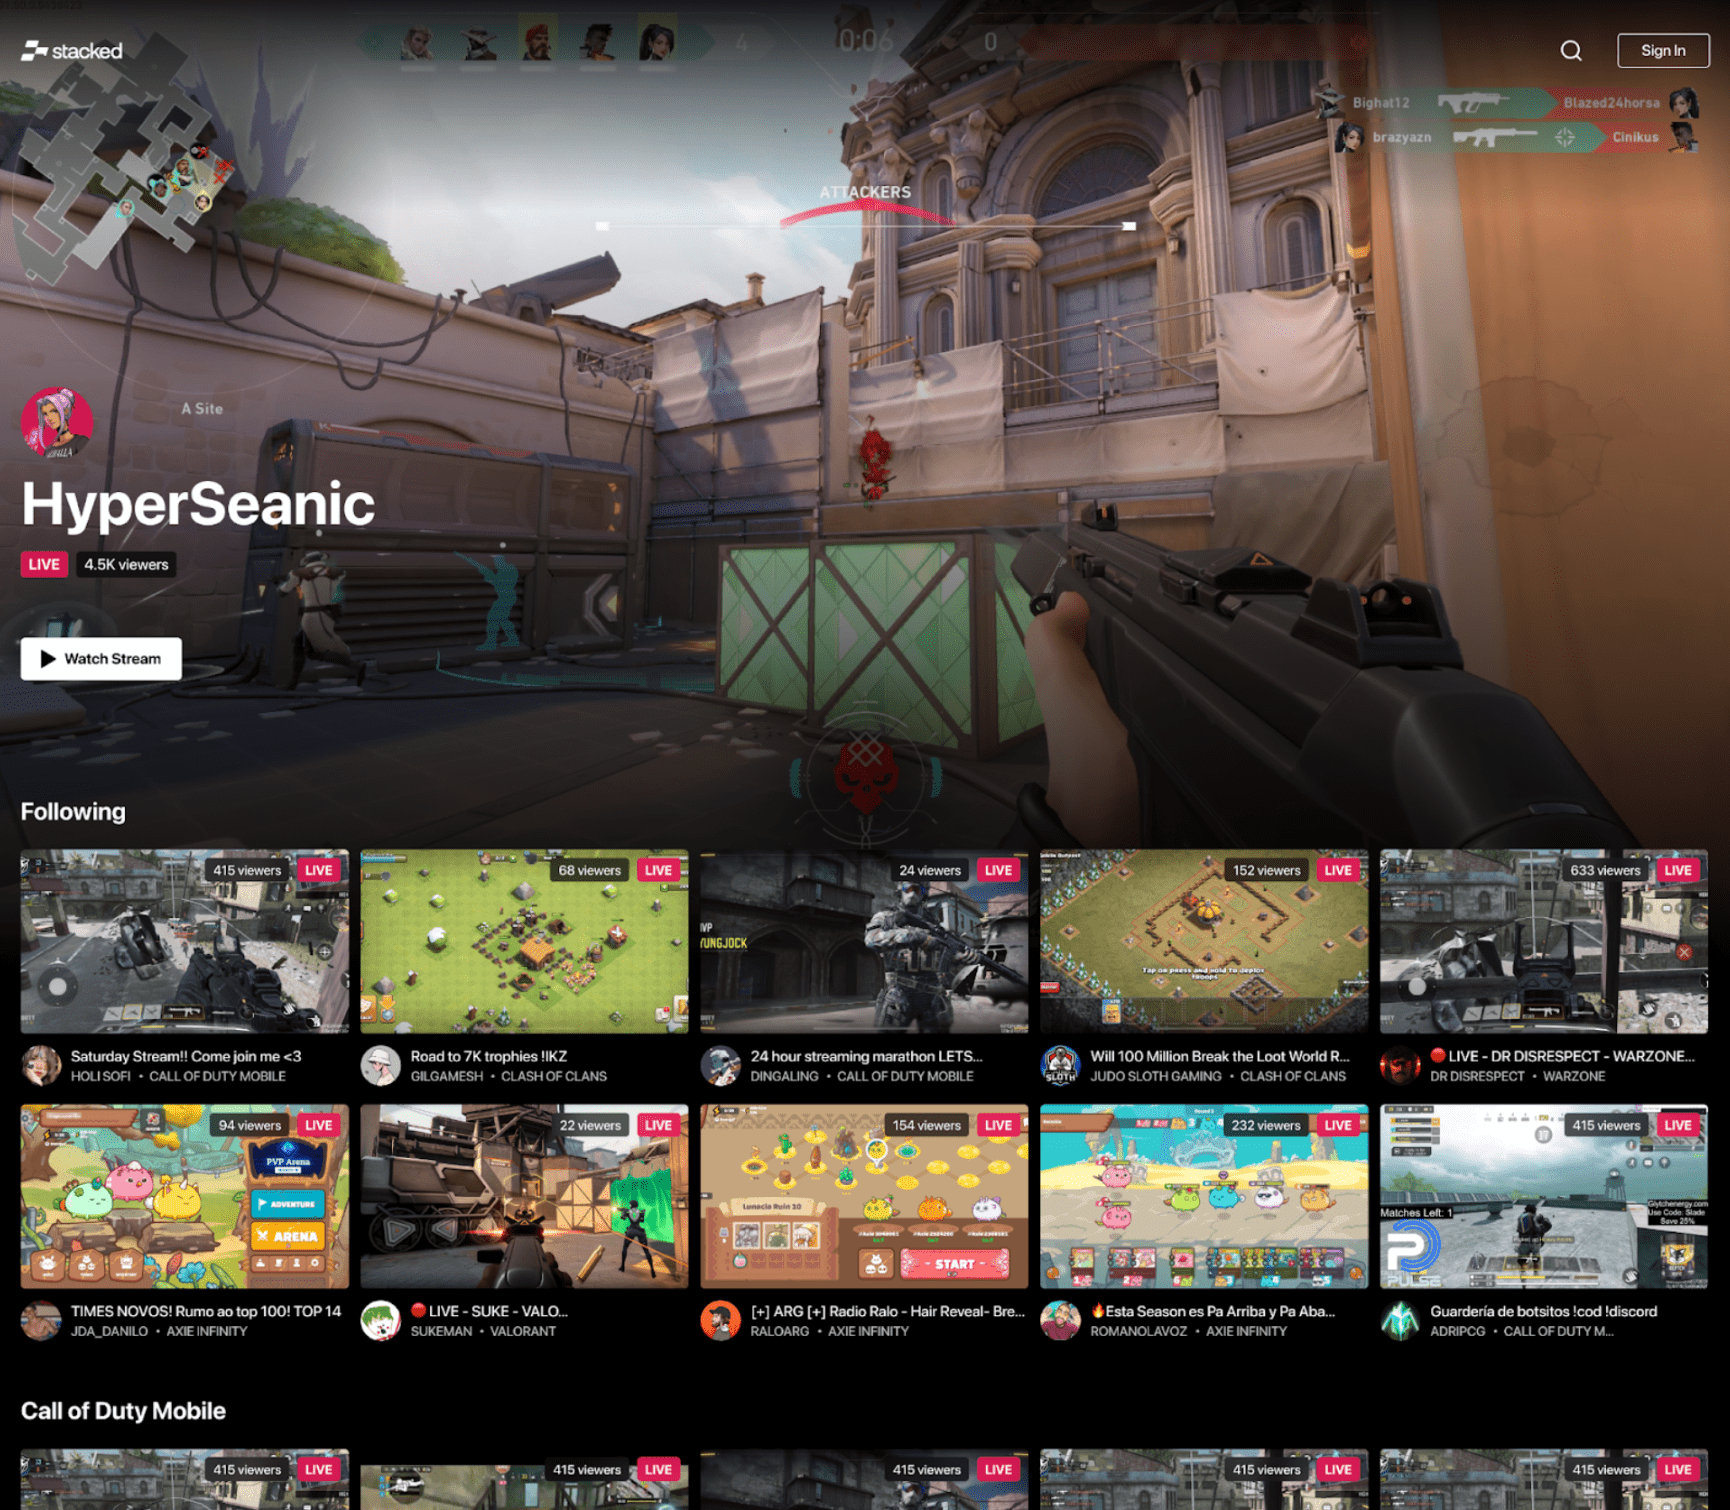 Web3 live streaming platform Stacked raises $12.9m fund; promises to transfer content creators the ownership